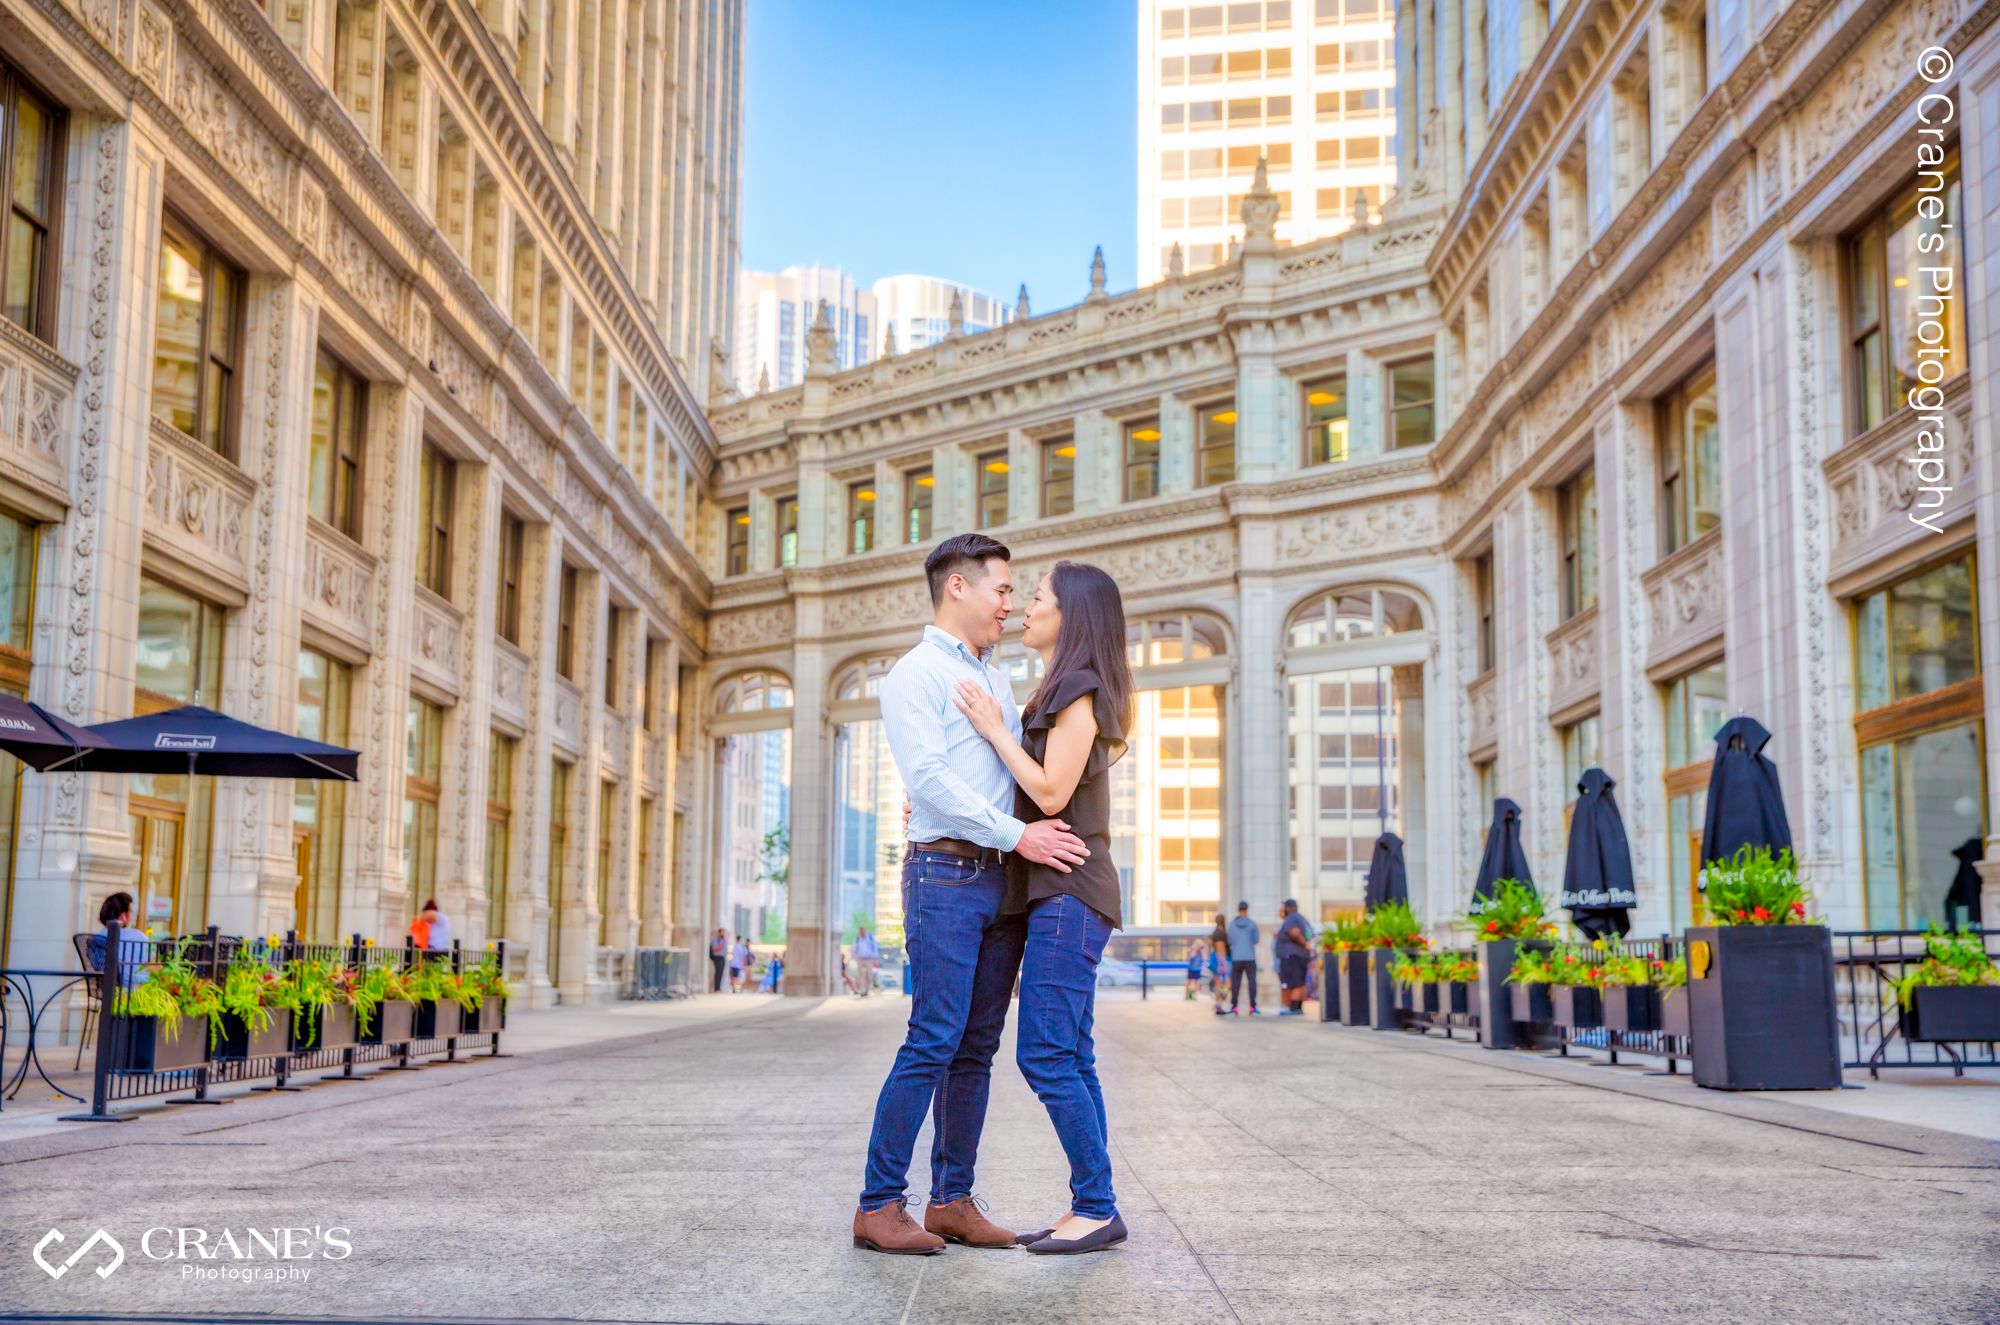 An engagement session at Wrigley building with the skywalk in the background